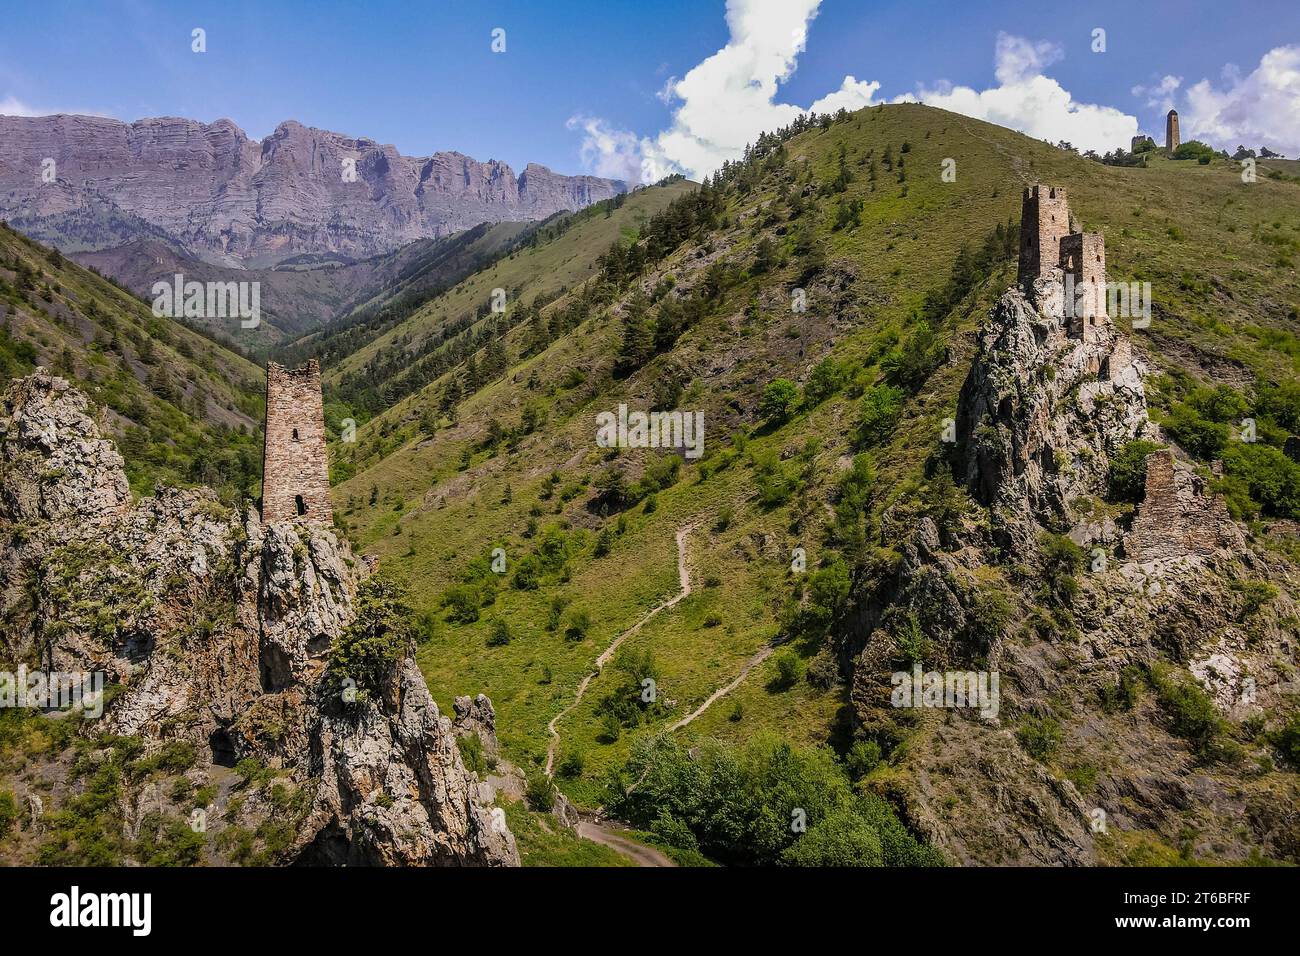 The aerial photo of ancient Ingush towers Vovnushki on the rock cliffs in the scenic mountains of Ingushetia Republic, Caucasus, southern Russia. Stock Photo